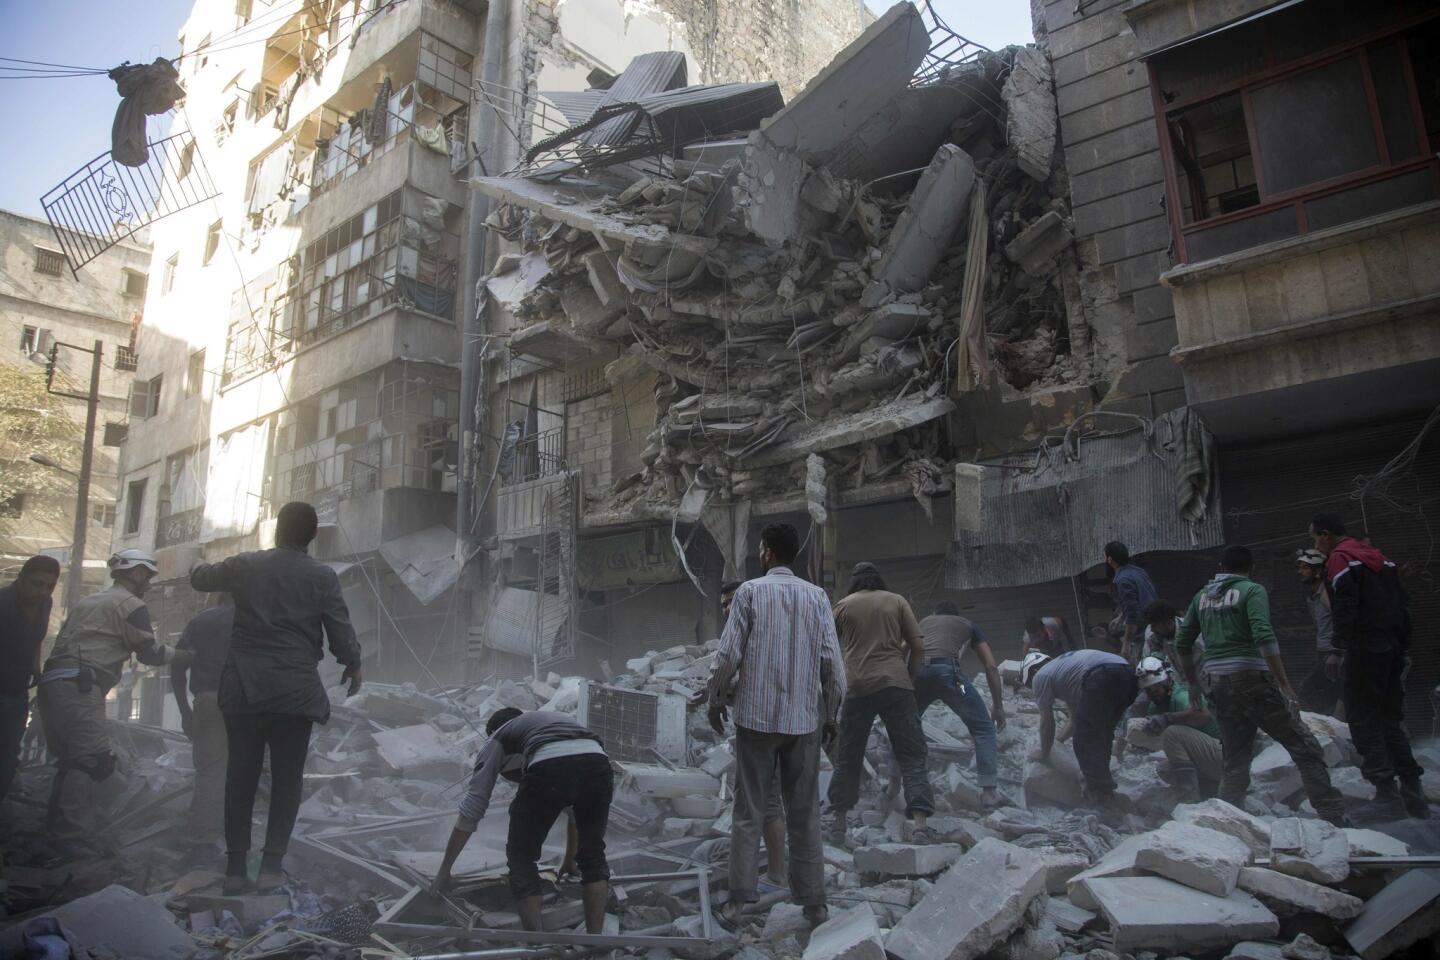 Syrian civilians gather after government airstrikes in the rebel-held Shaar neighborhood of Aleppo.